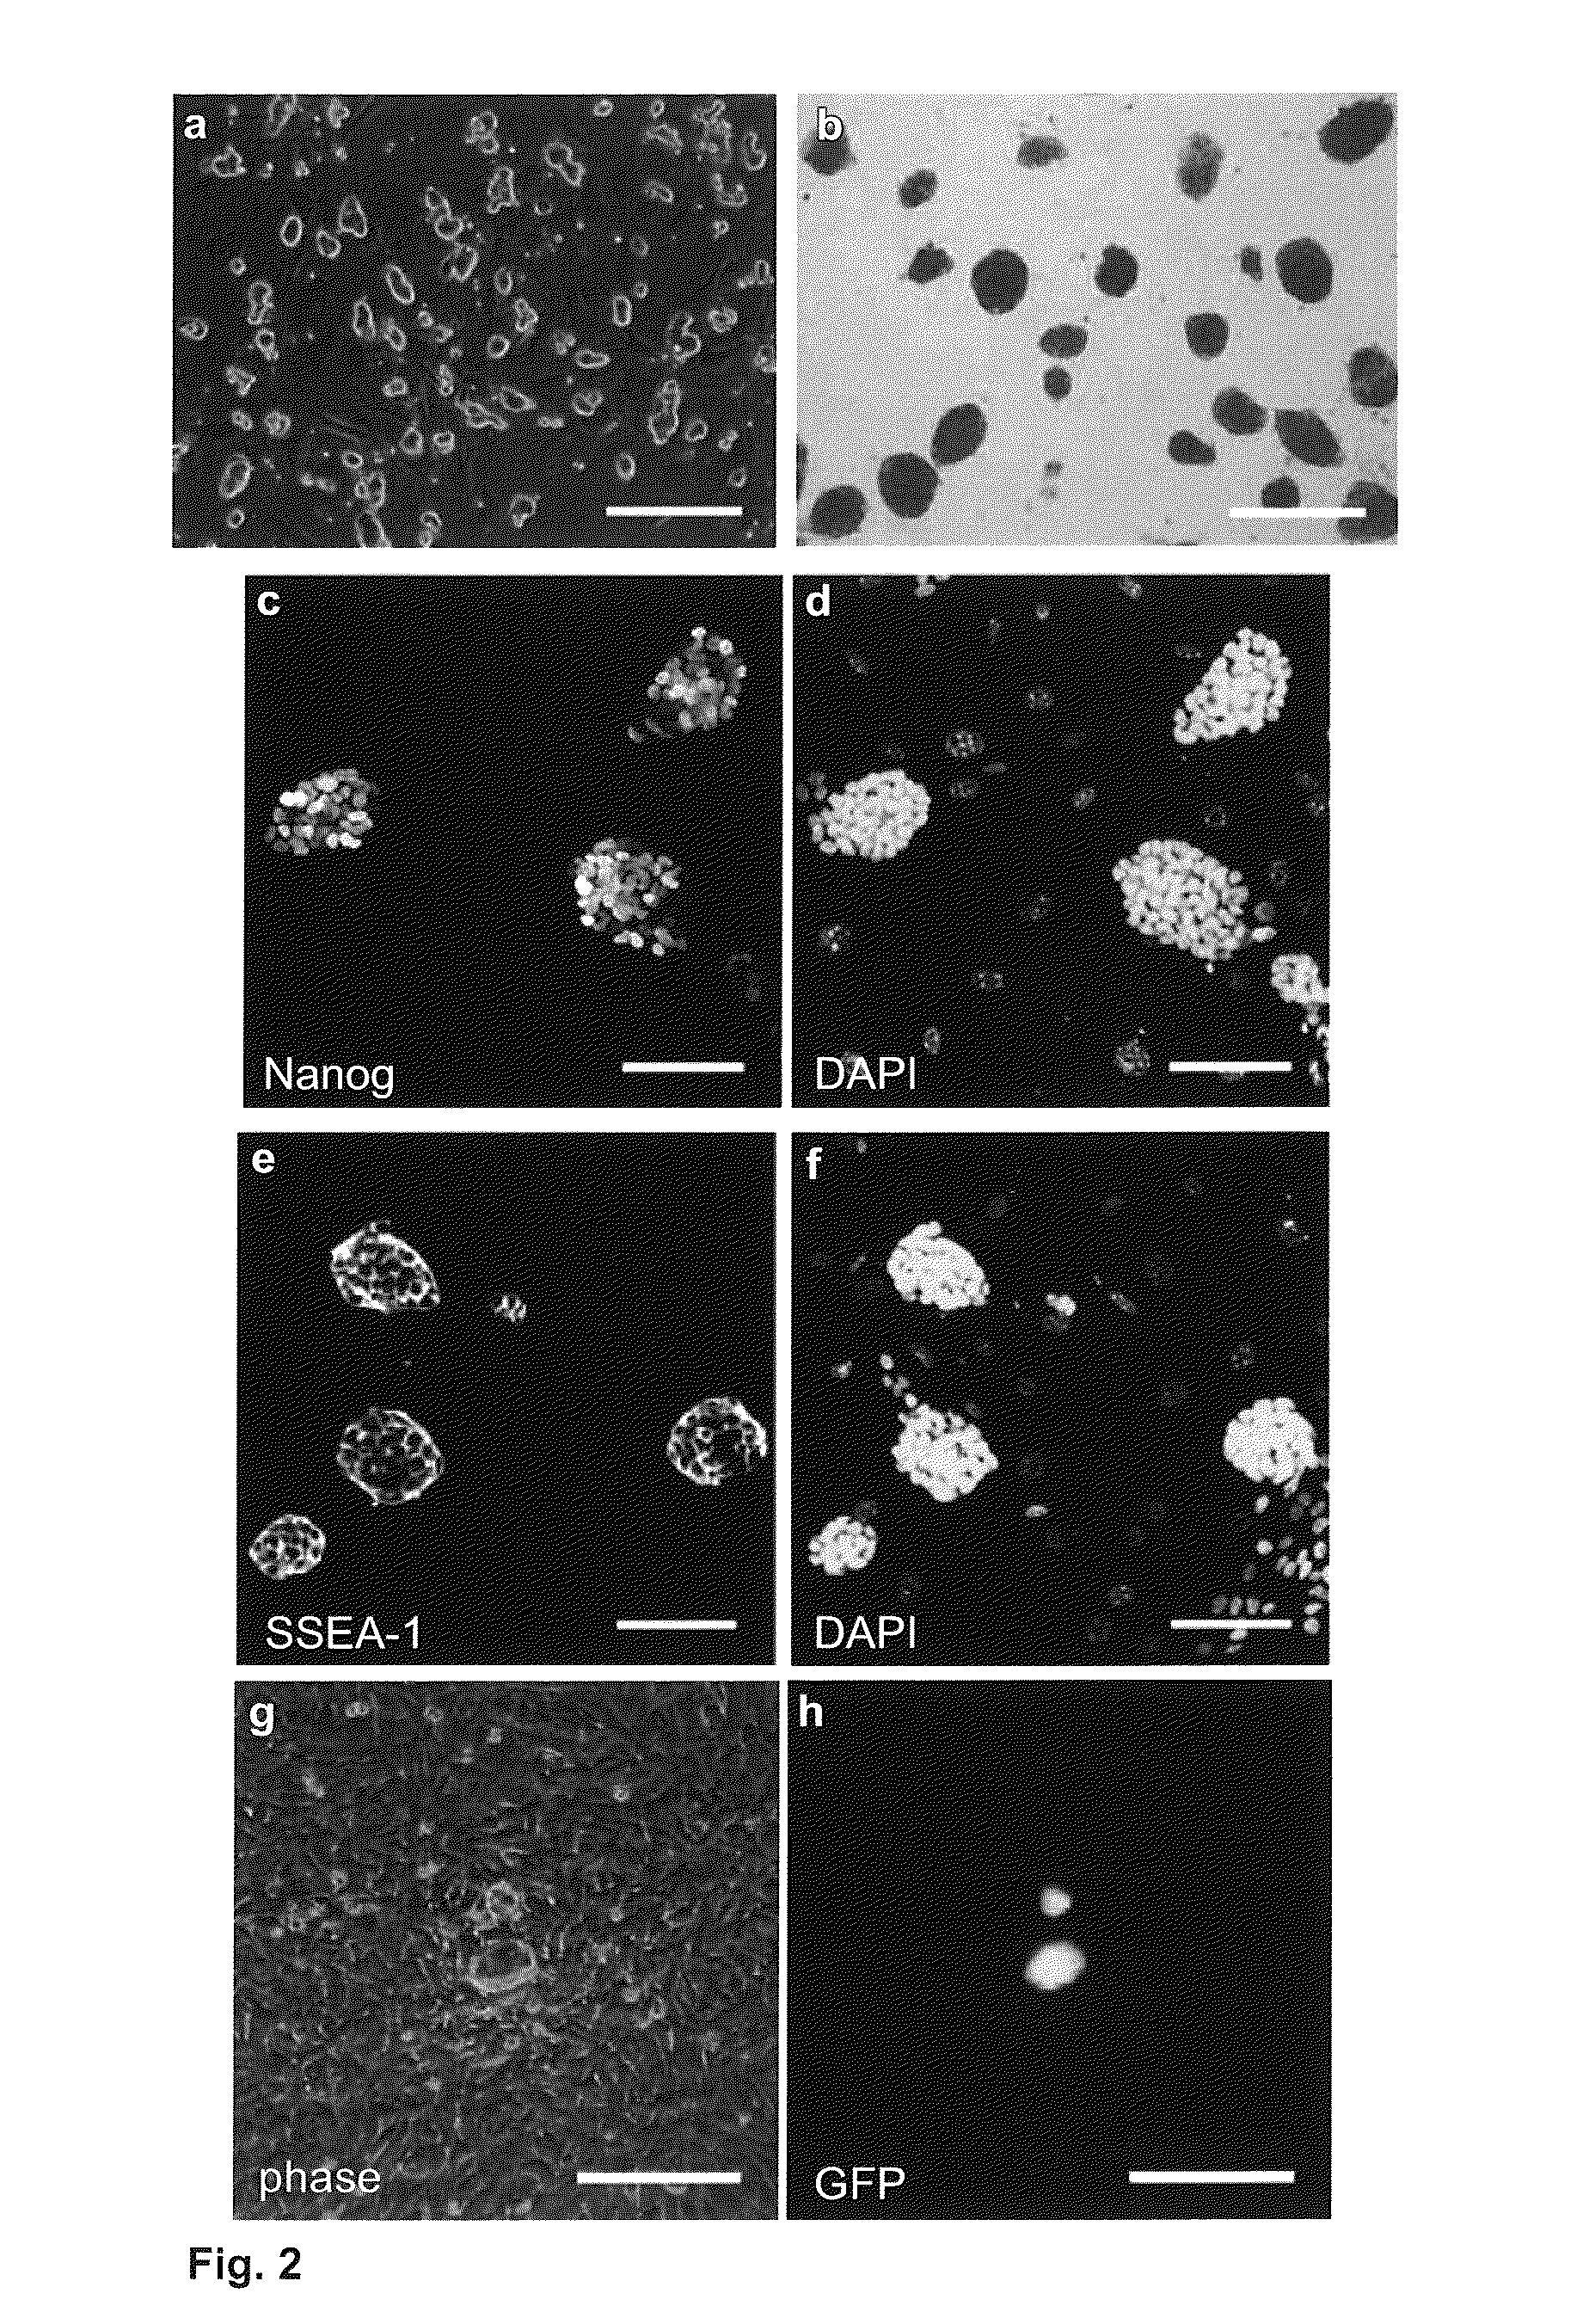 Method of effecting de-differentiation of a cell